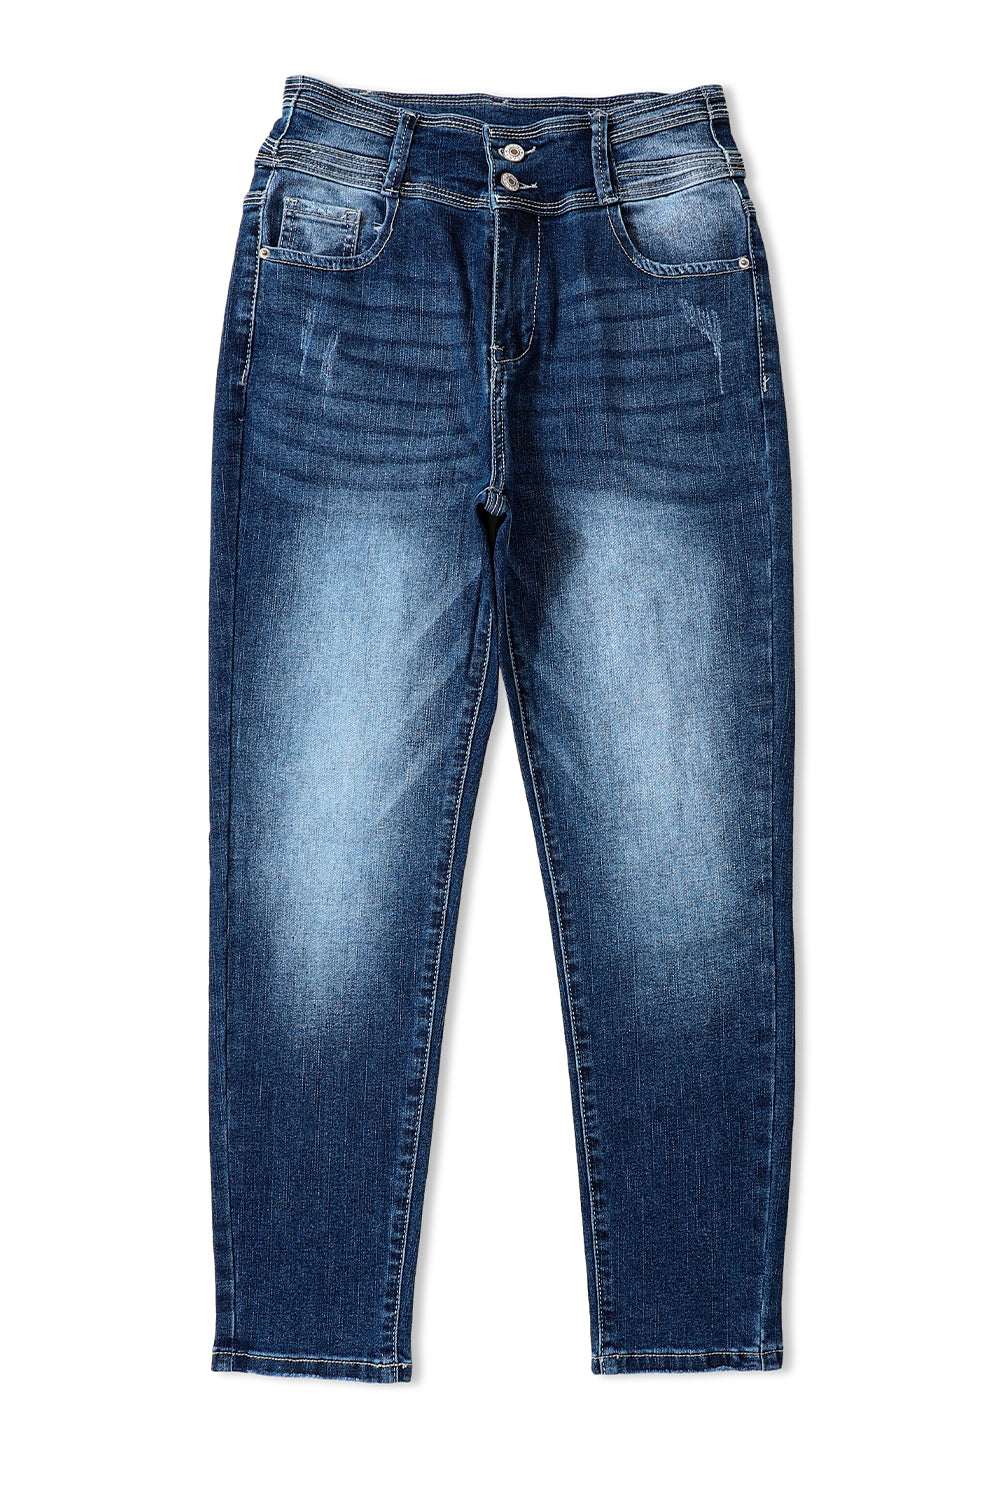 - Blue Vintage Washed Two-button High Waist Skinny Jeans - women's jeans at TFC&H Co.